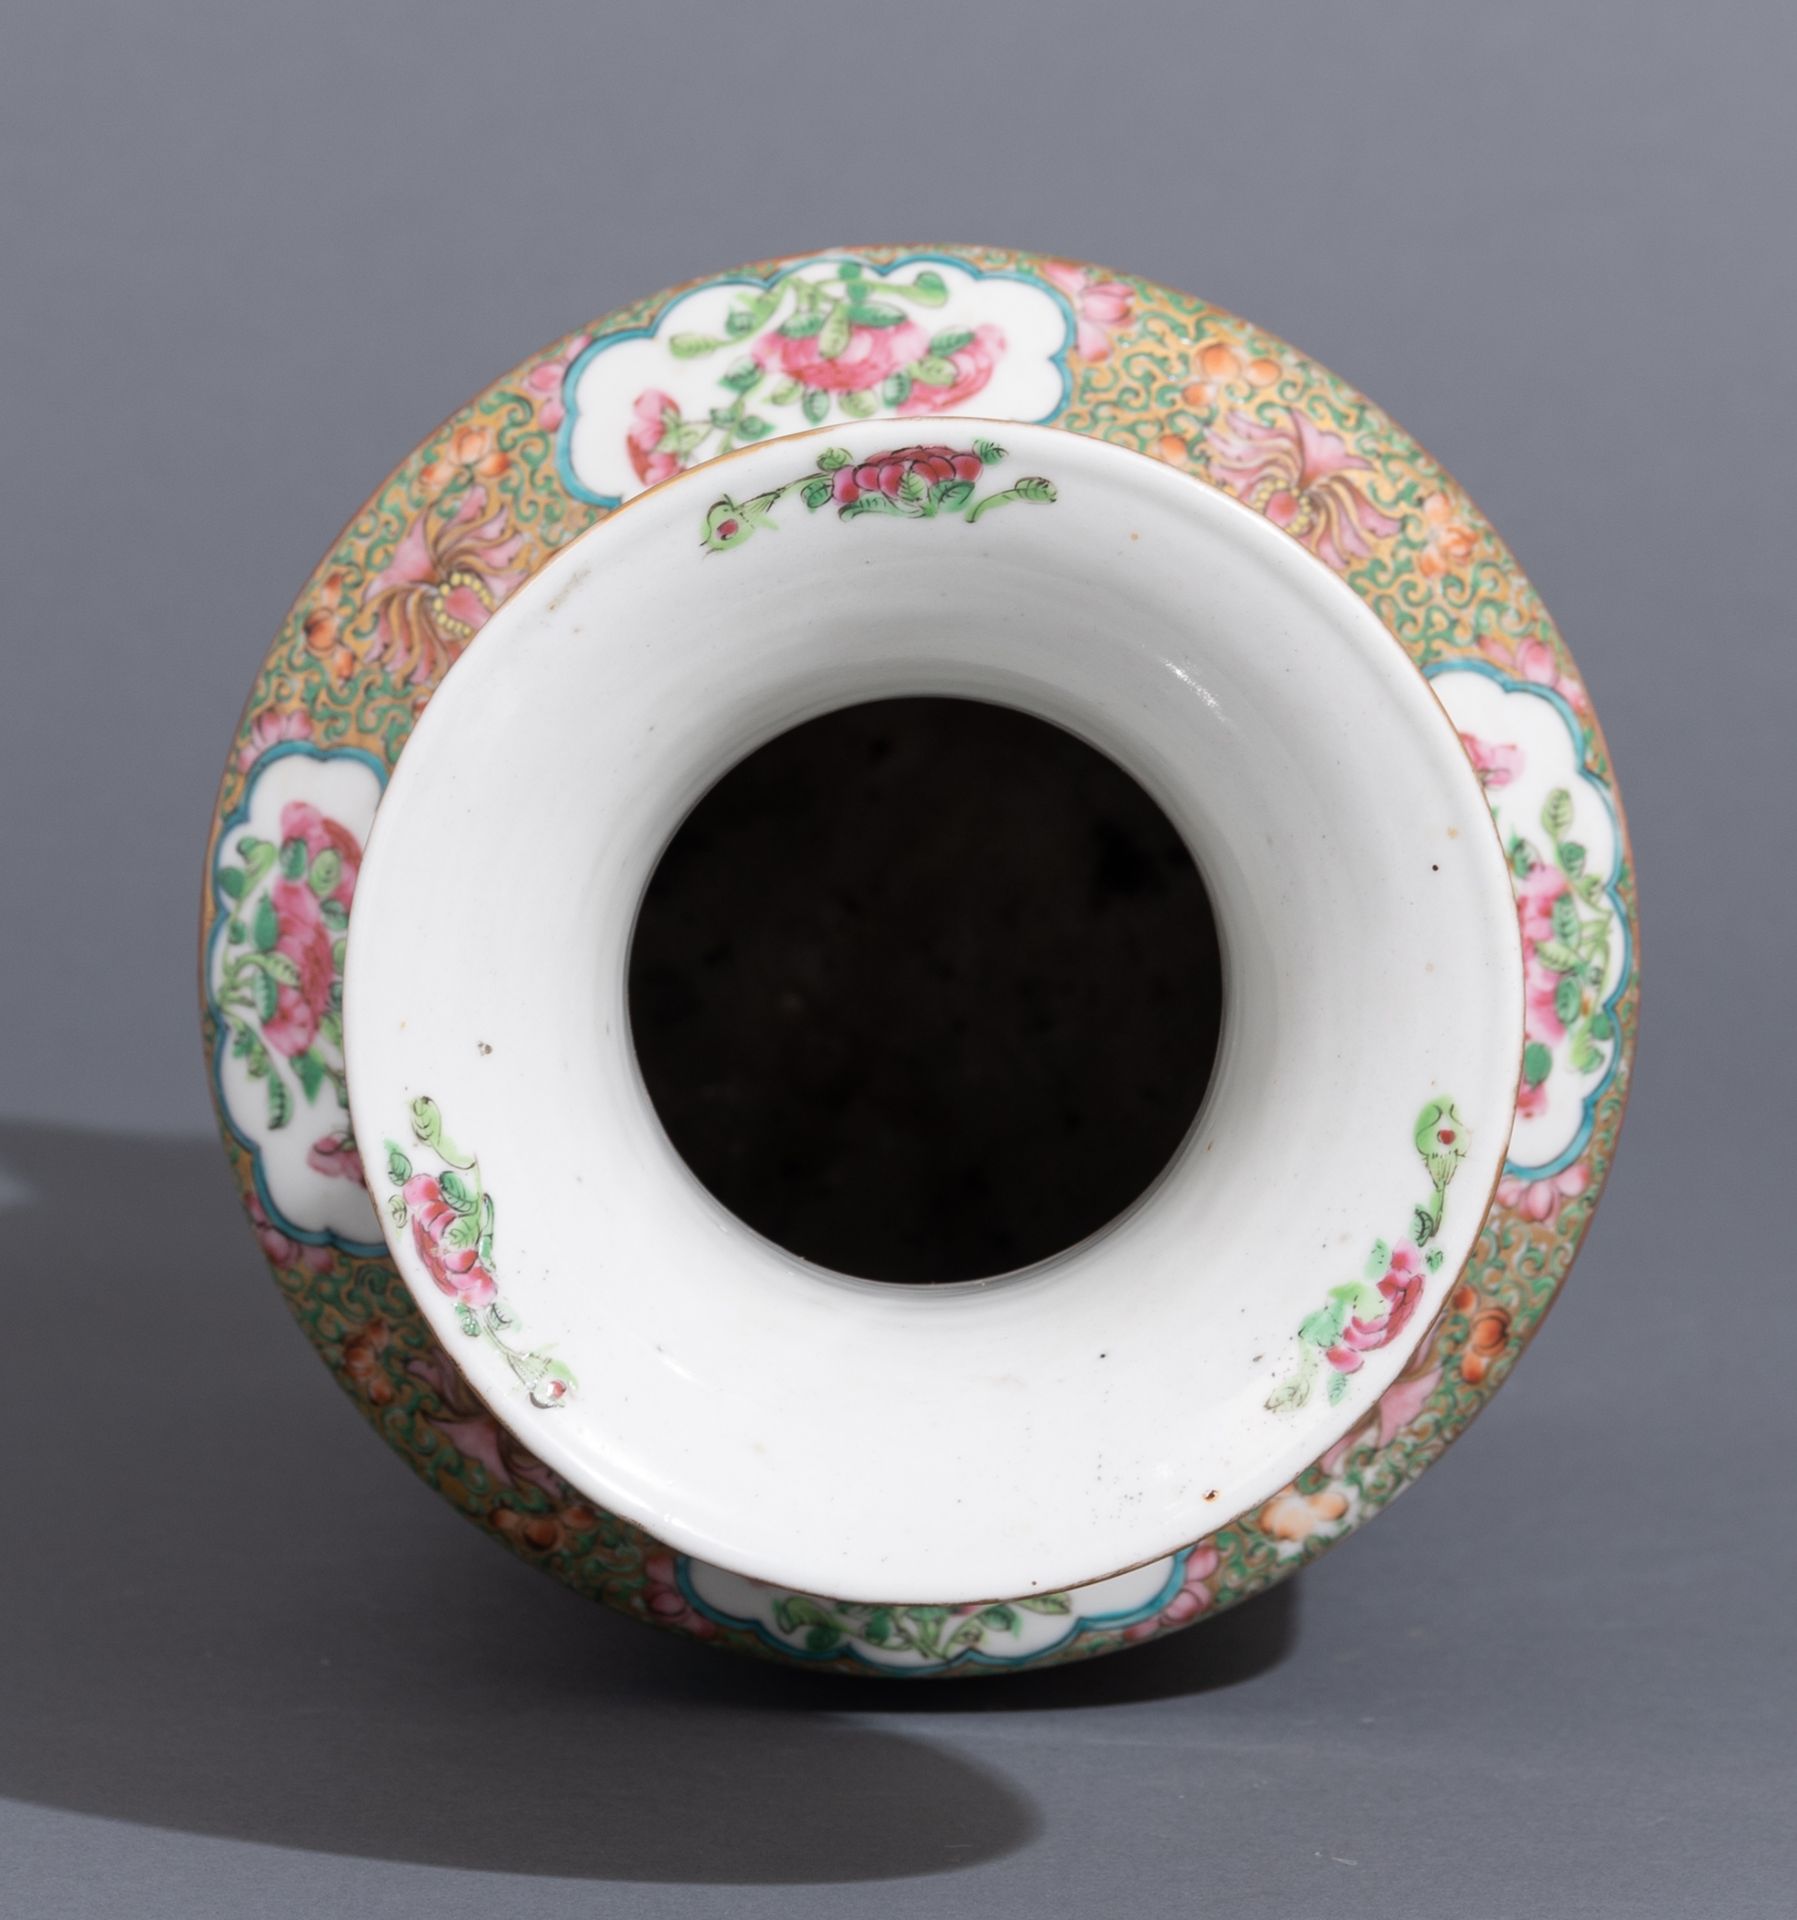 A collection of Chinese and Japanese porcelain items, 18th / 19th / 20thC, H 4 - 47 - ø 10,5 - 23 cm - Image 6 of 19